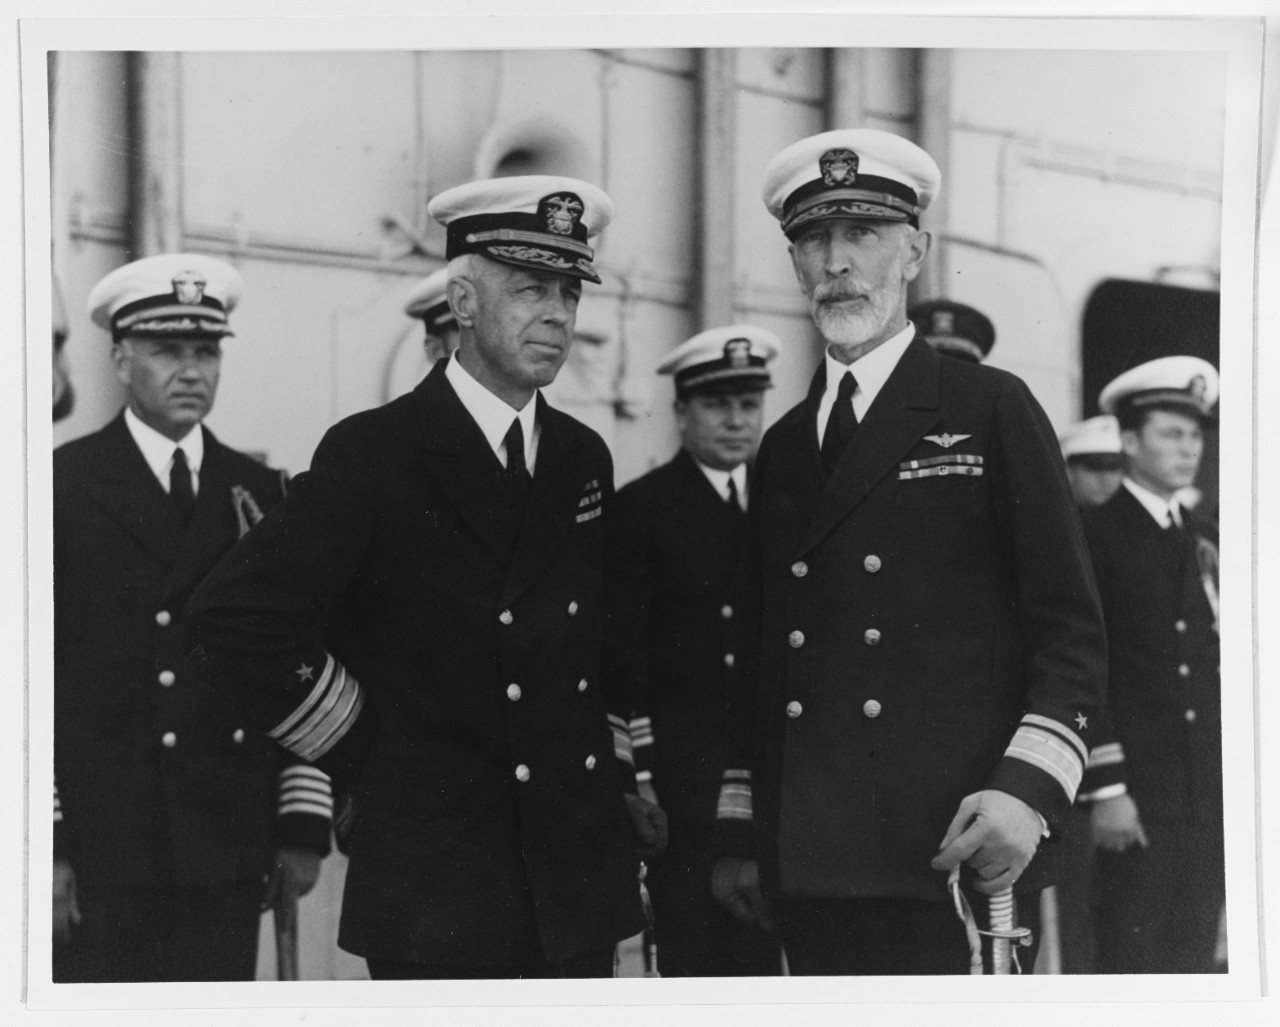 Rear Admiral Harry E. Yarnell and Rear Admiral J.M. Reeves